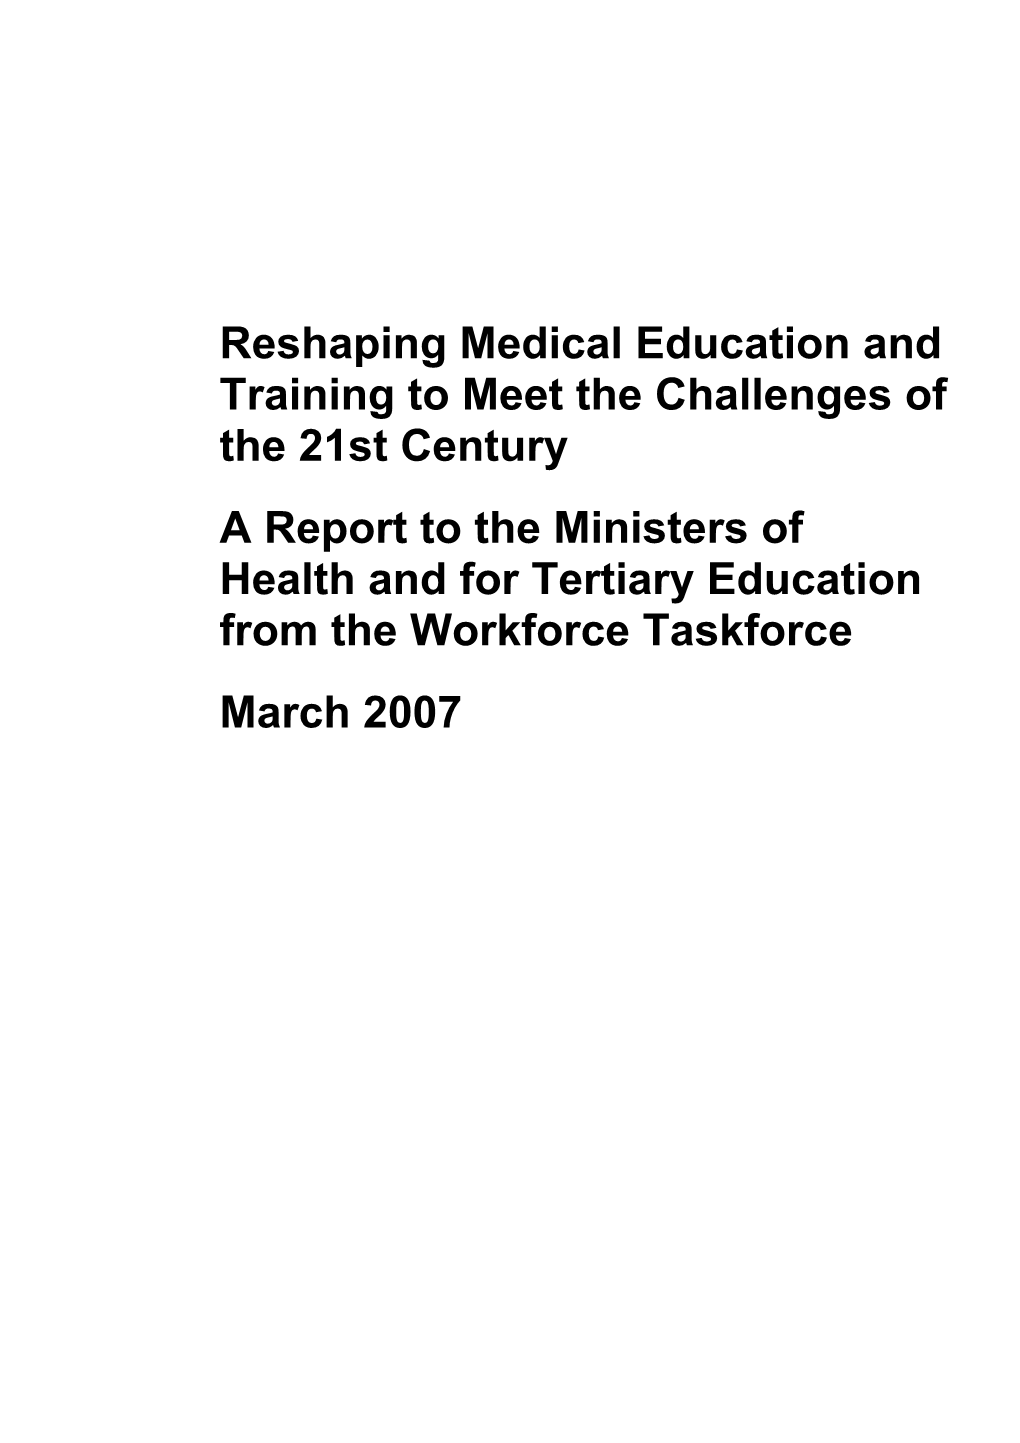 Reshaping Medical Education and Training to Meet the Challenges of the 21St Century